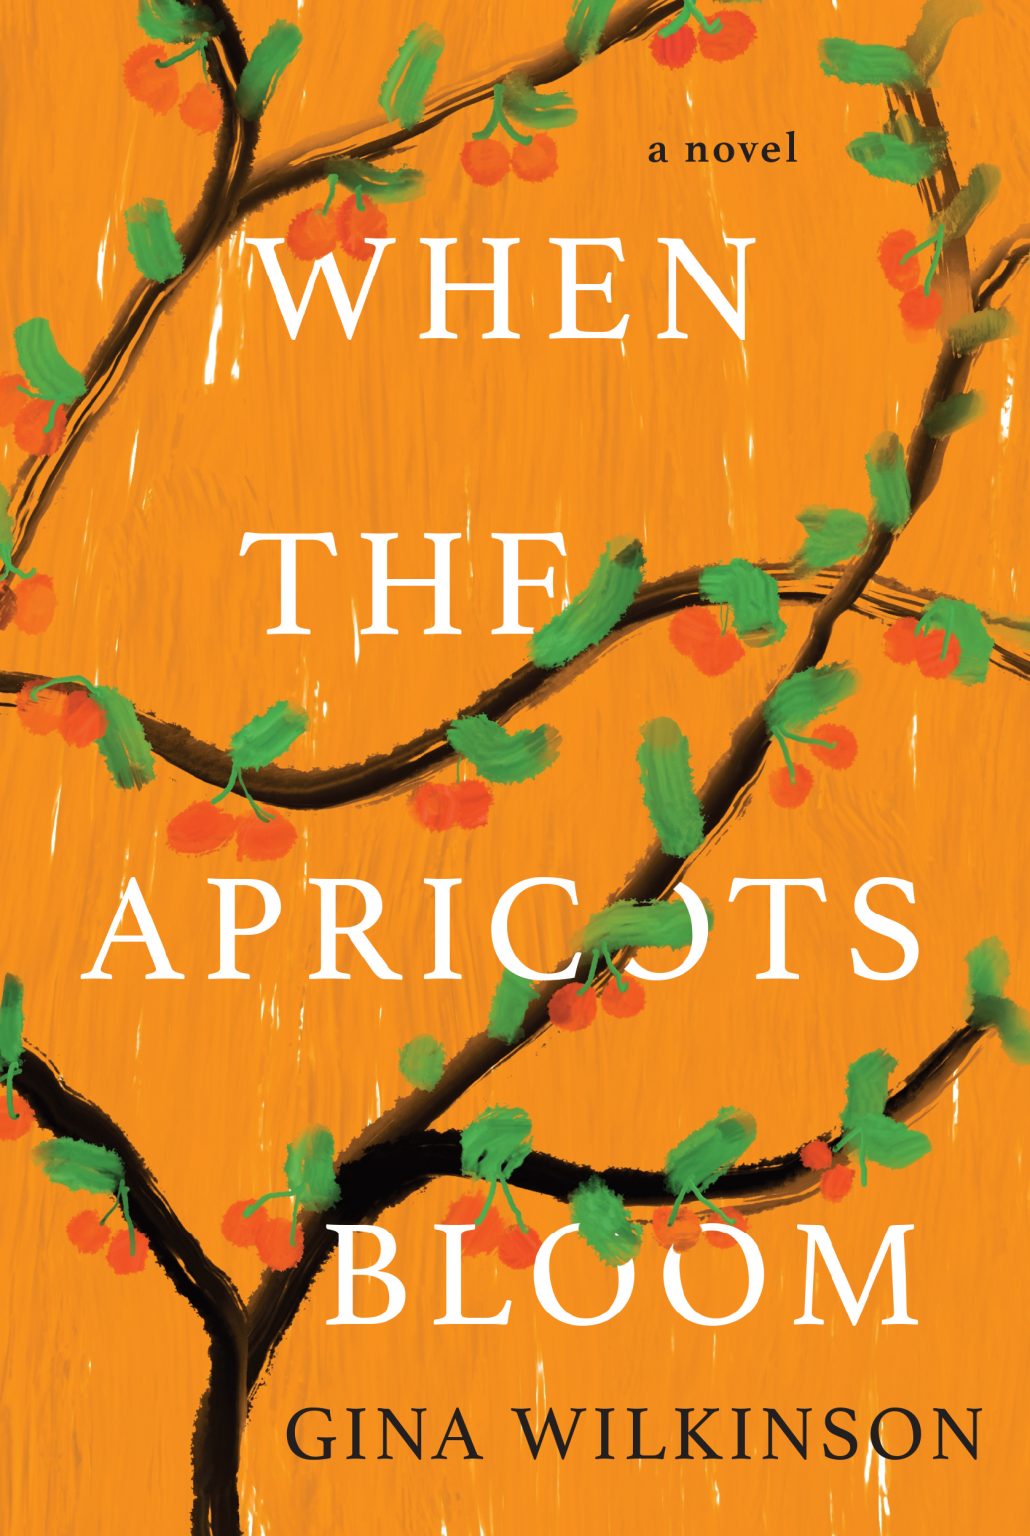 One of our recommended books is When the Apricots Blooms by Gina Wilkinson